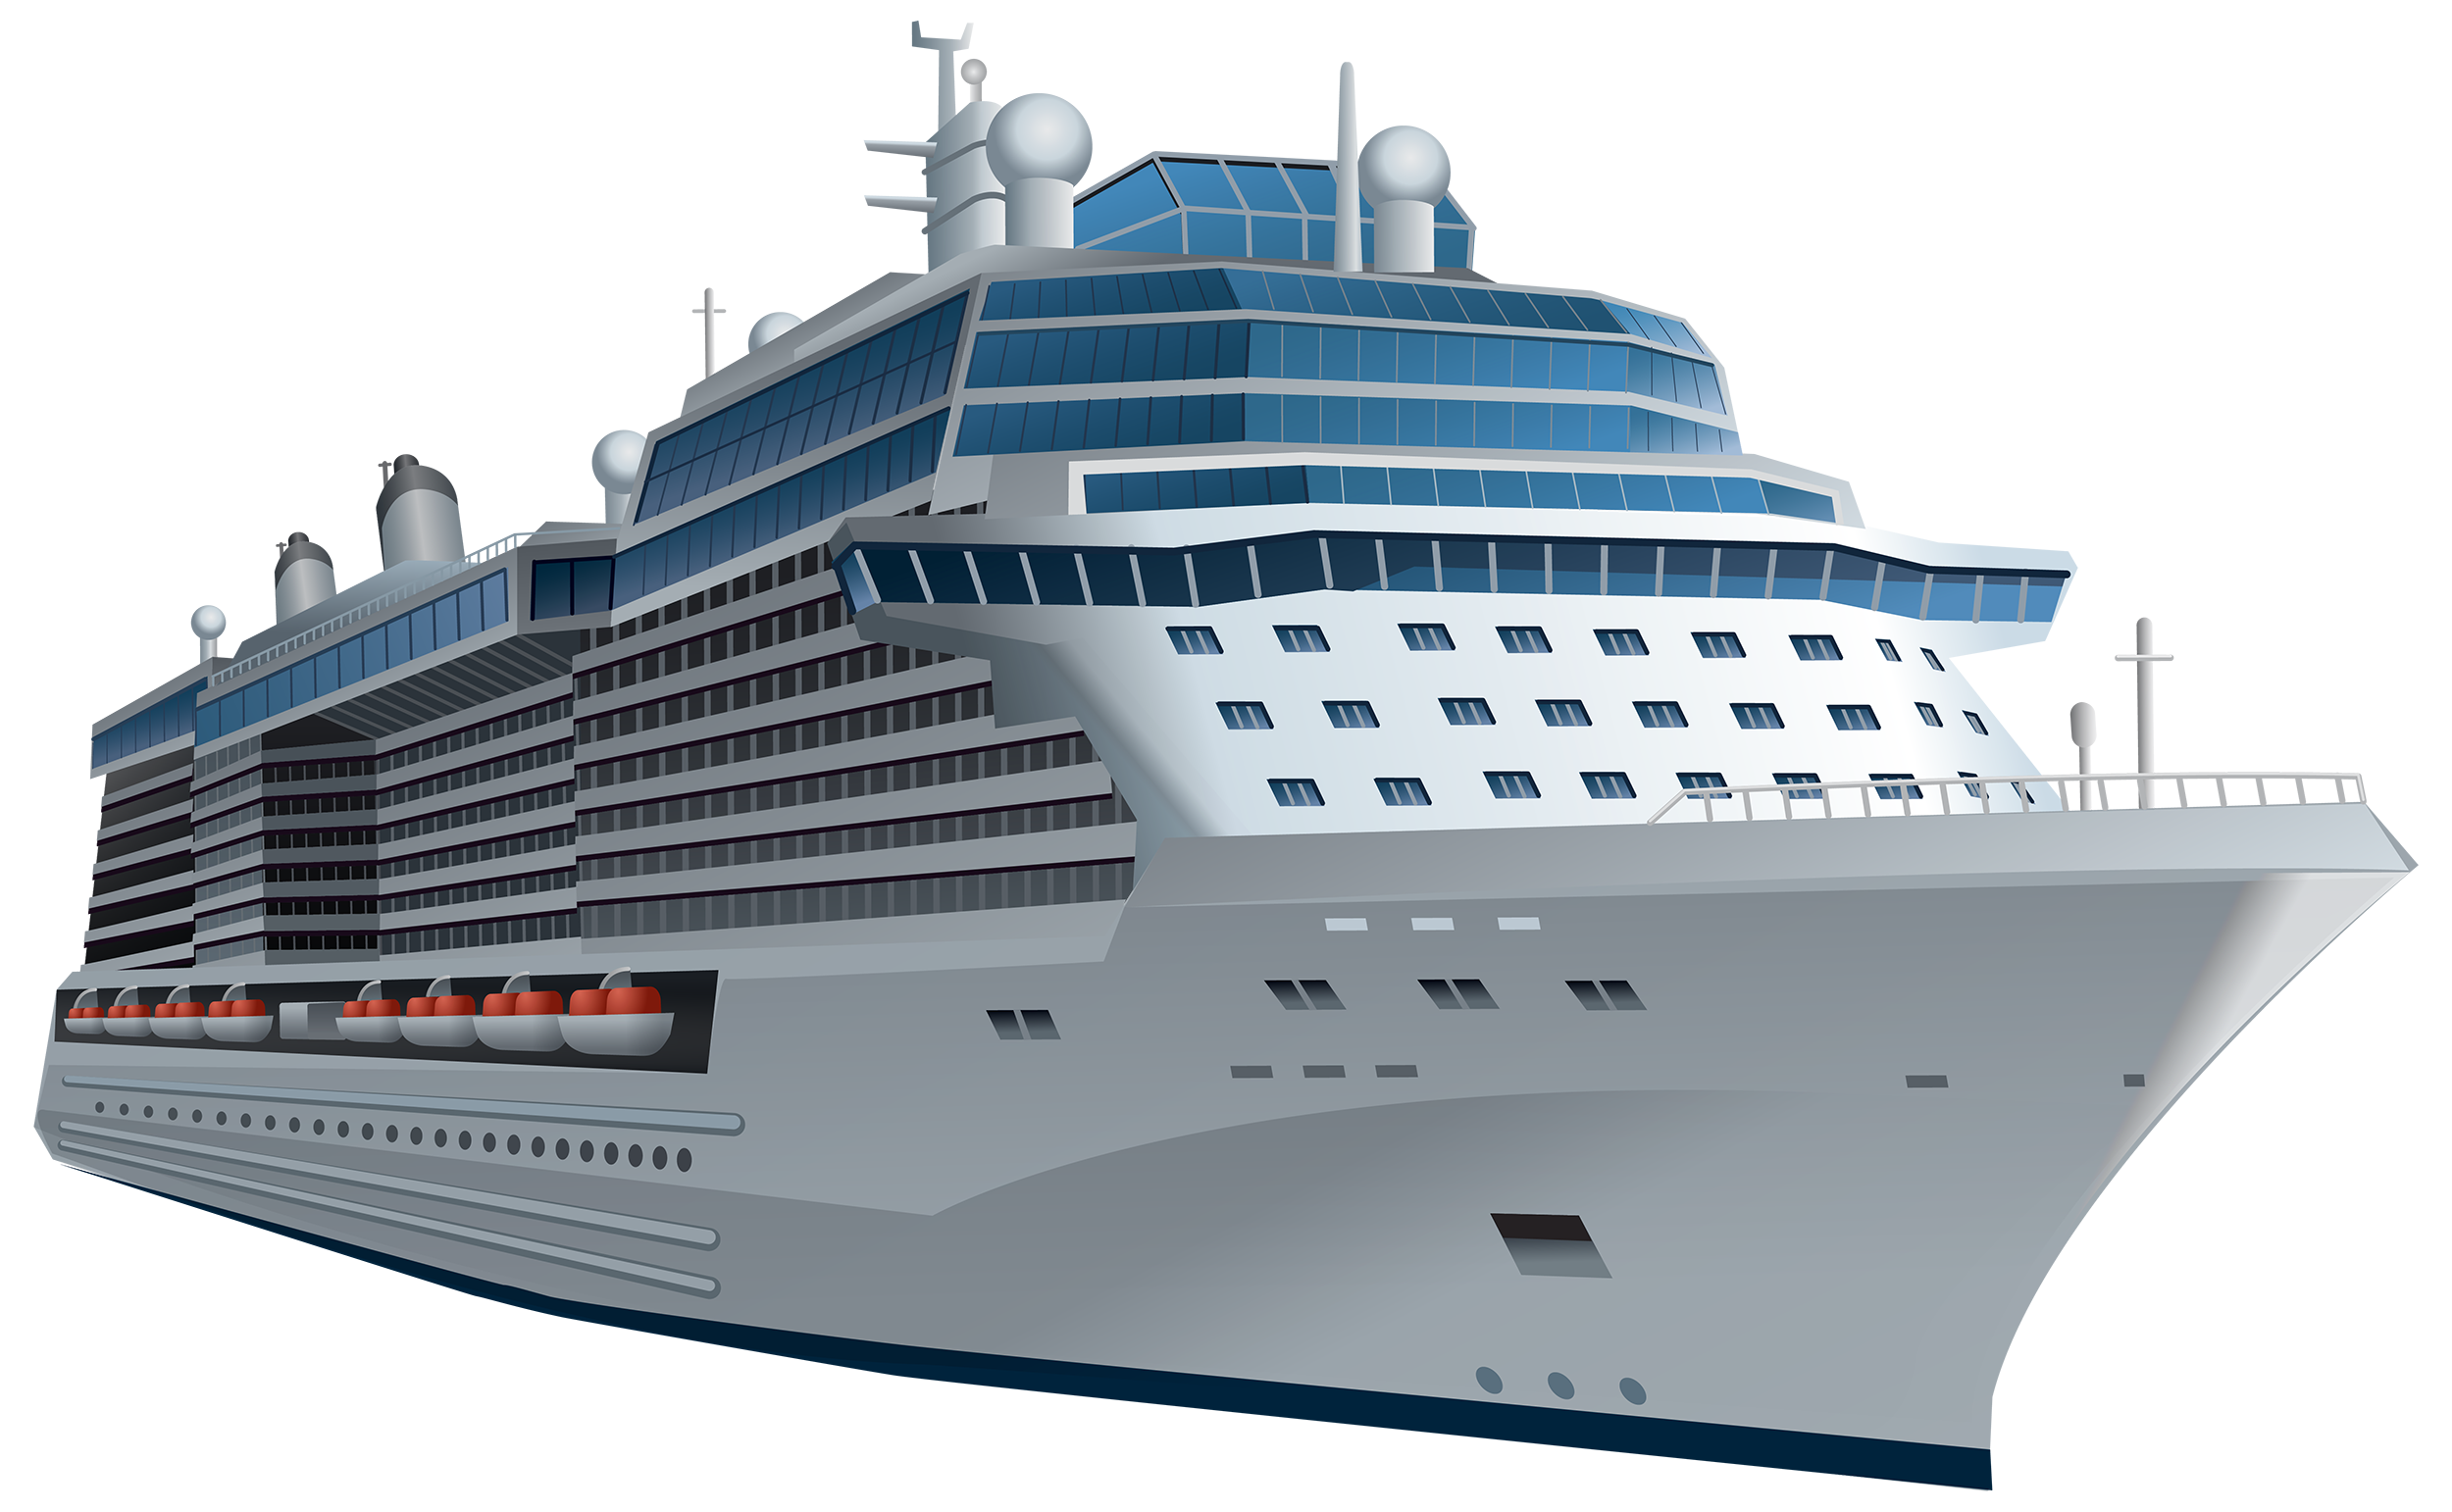 Vacation Cruise Ship The